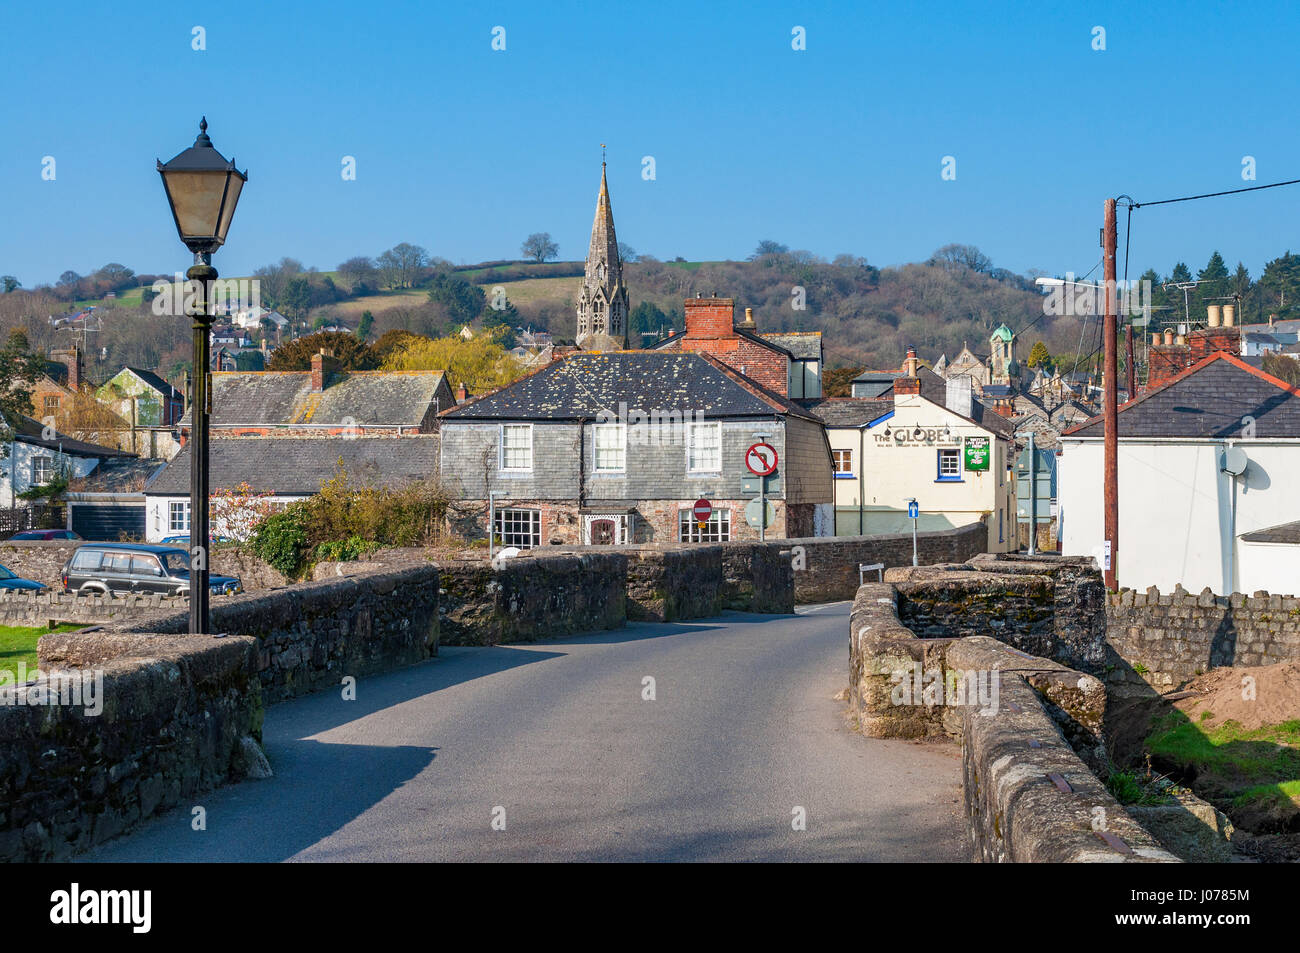 The historic town of Lostwithiel in Cornwall, England, Britain, UK> Stock Photo